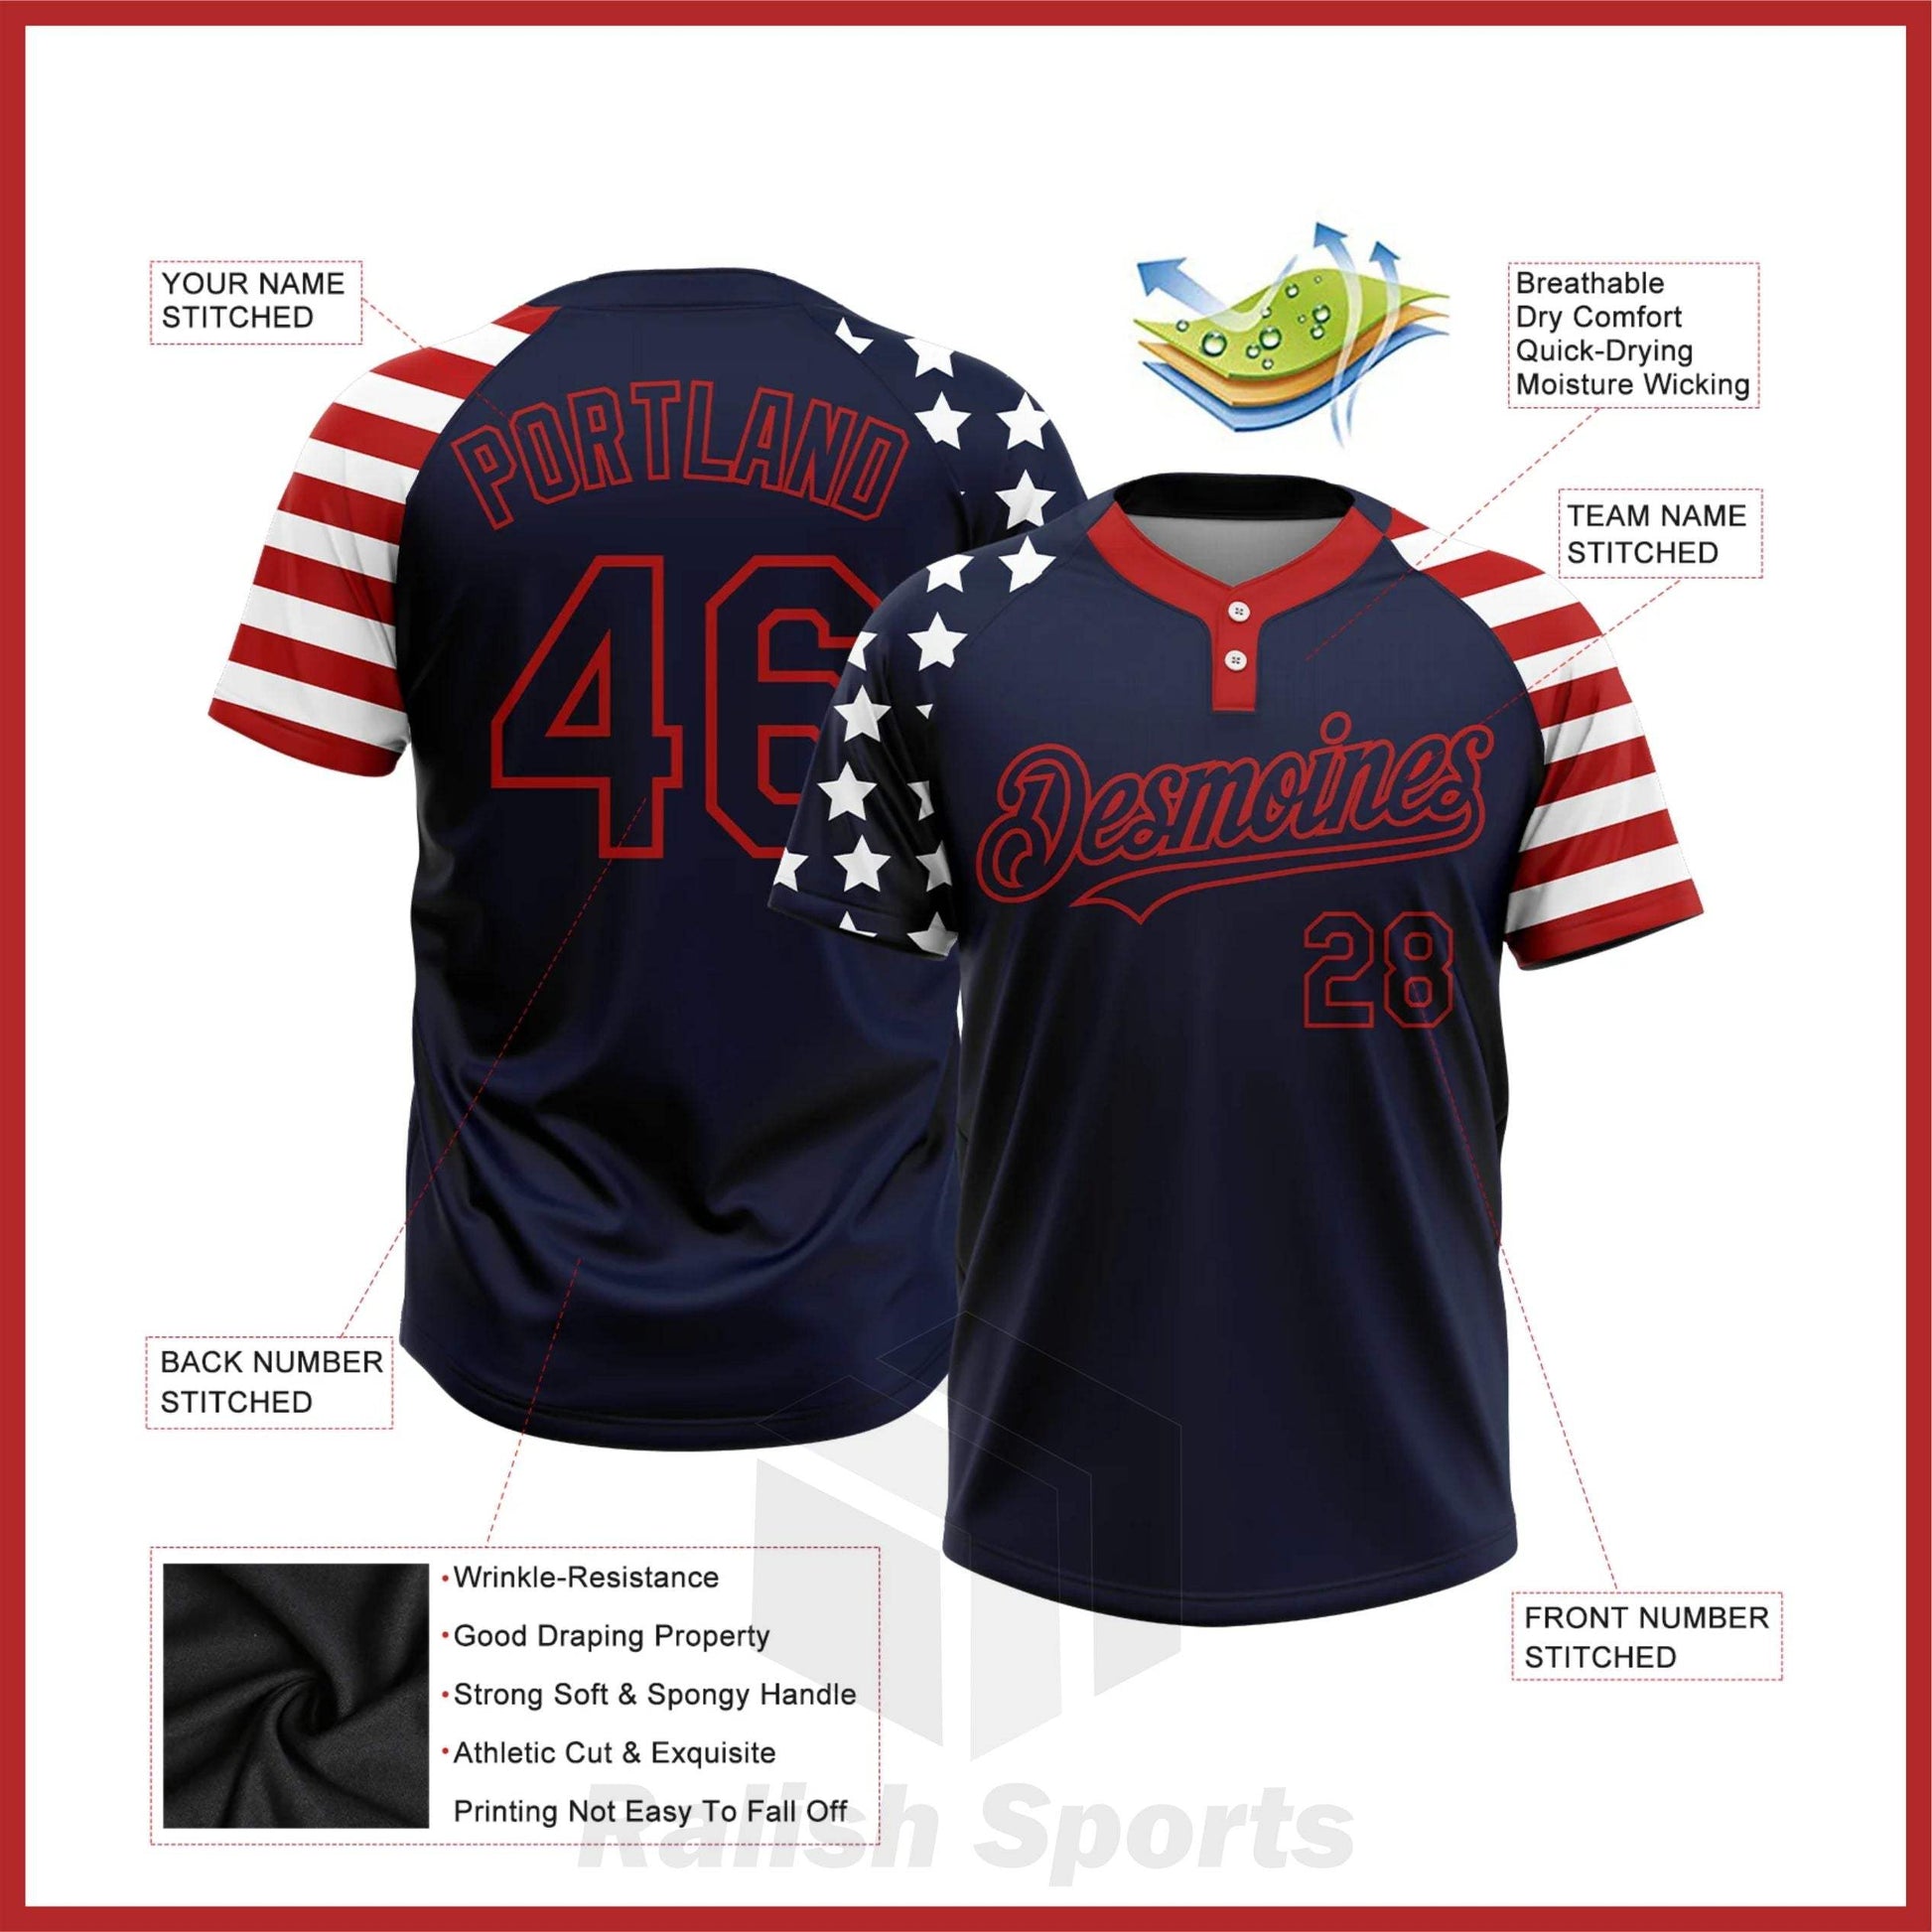 Custom Navy Red-White 3D American Flag Fashion Two-Button Unisex Softball Jersey - Ralish Sports